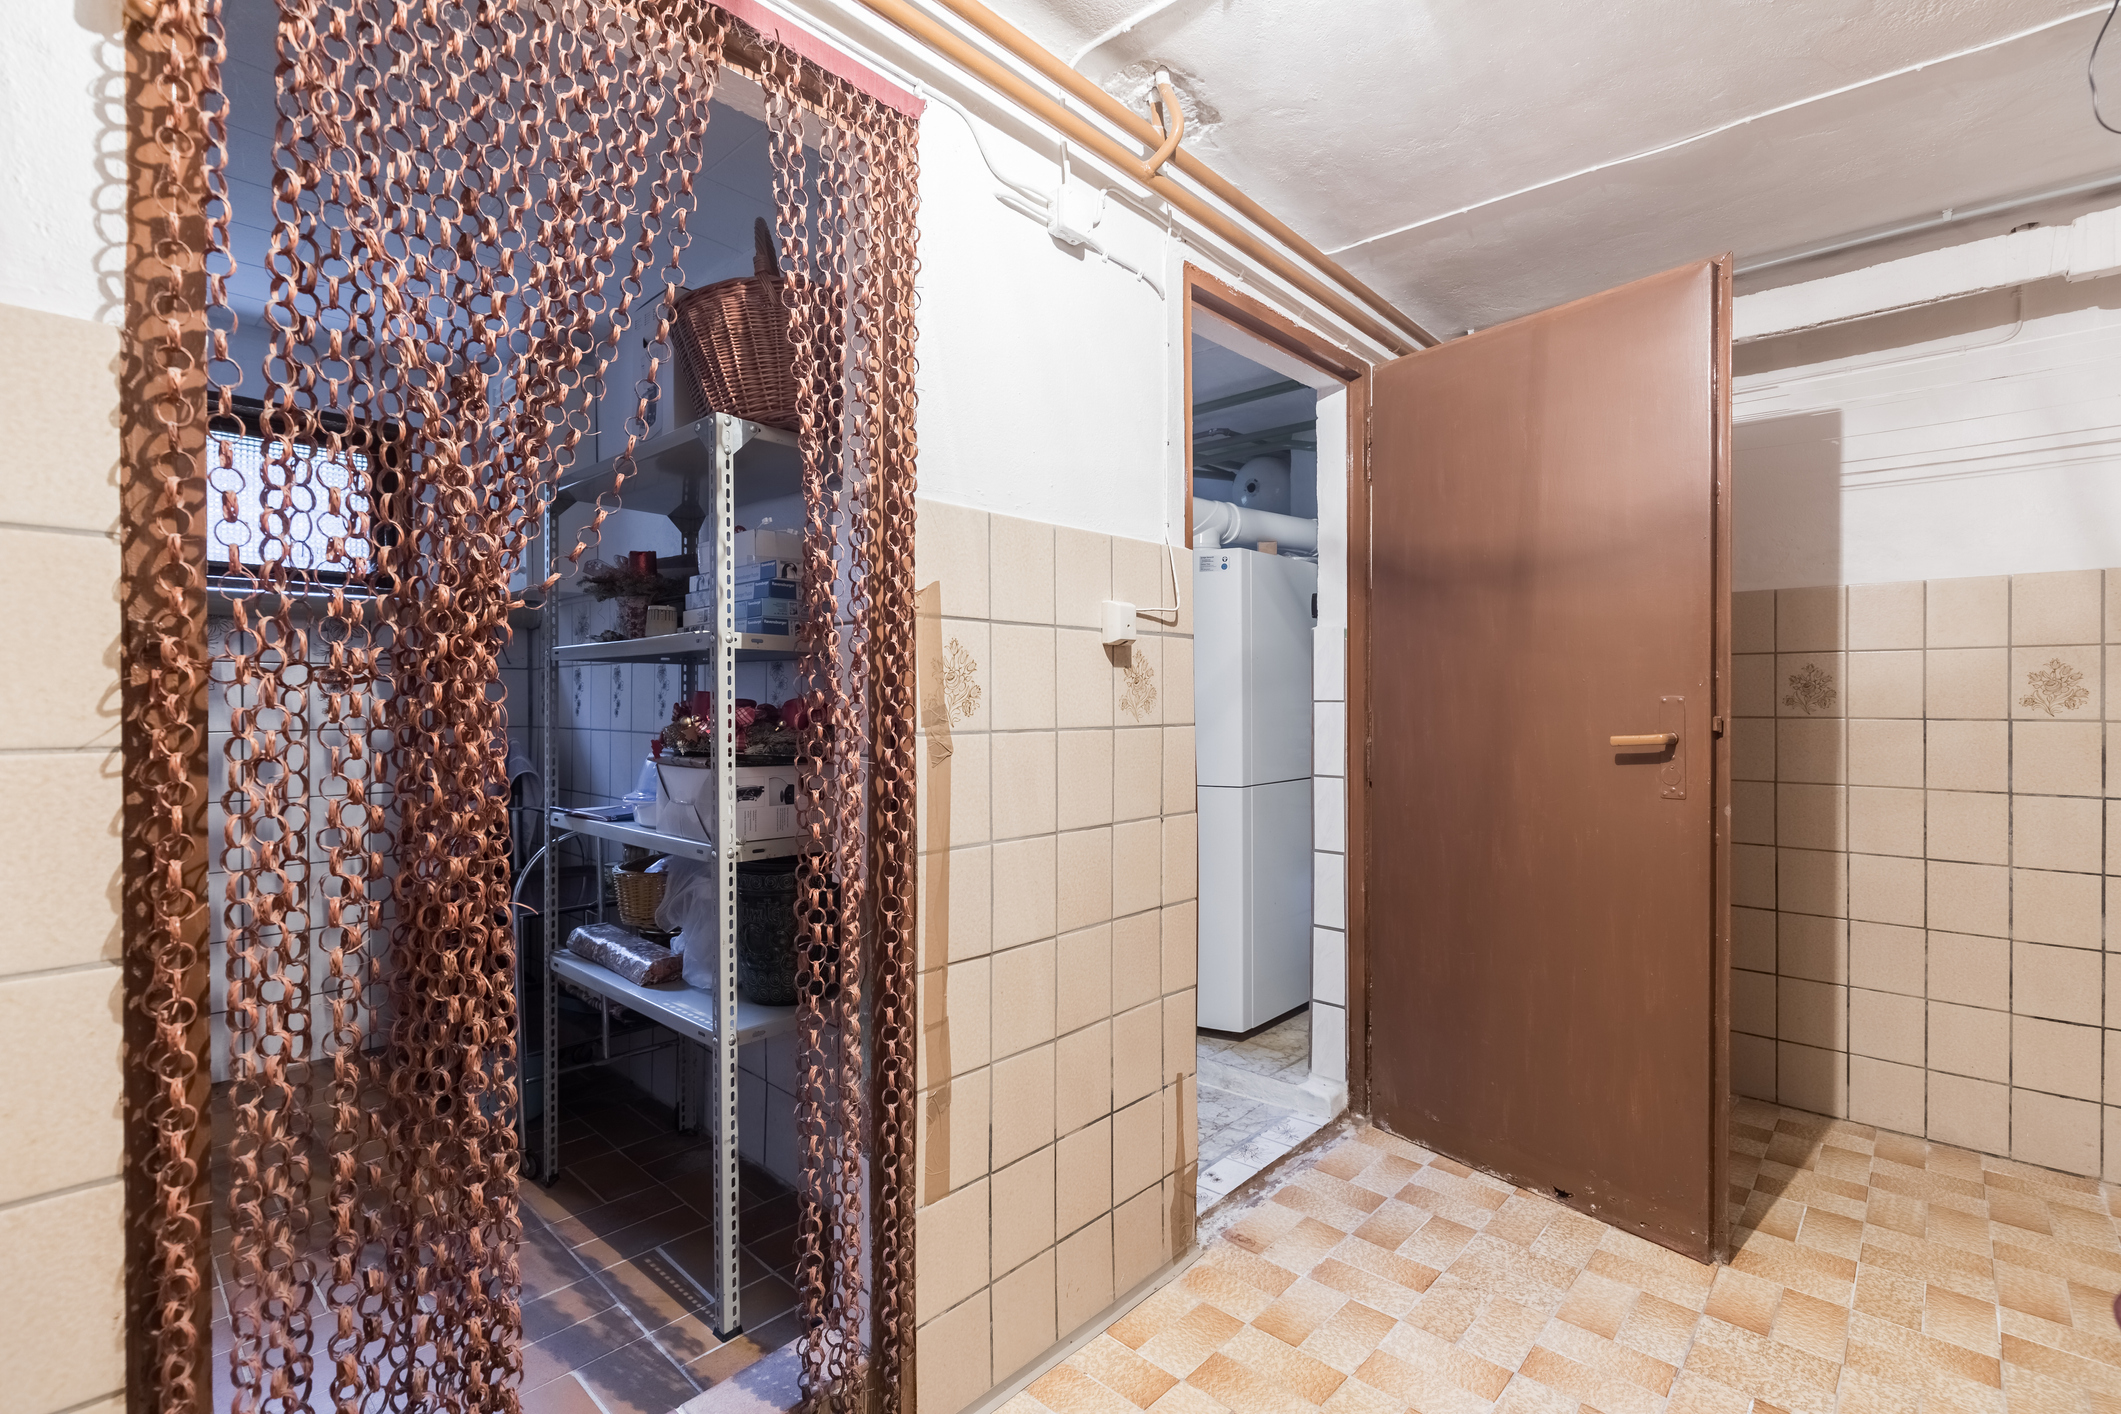 Basement apartment with old tile floor